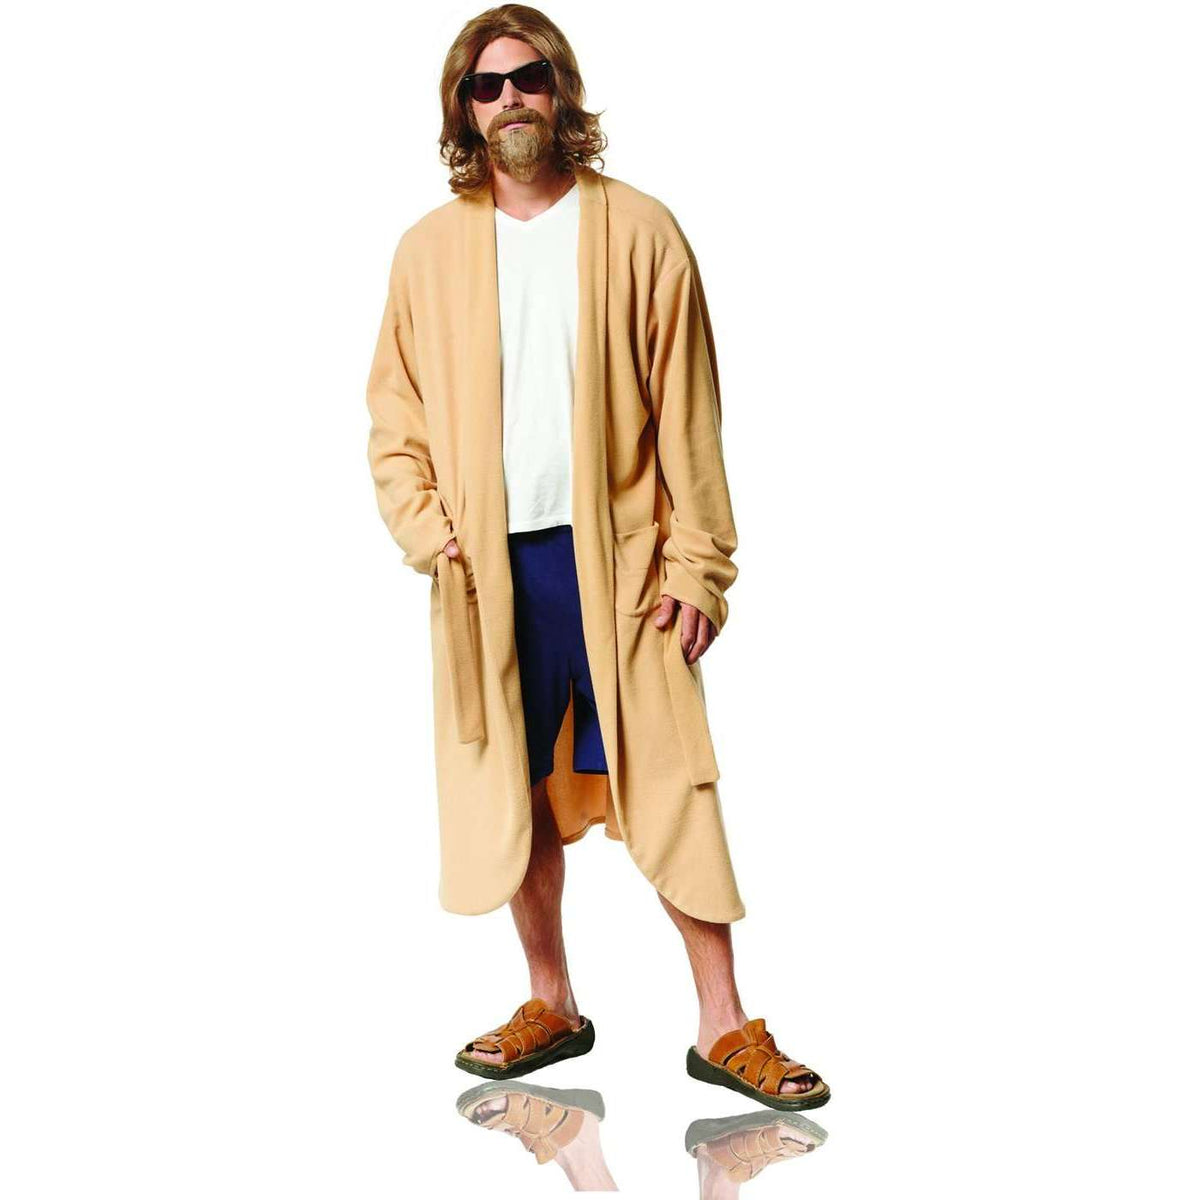 Lazy Guy Robe Men's Adult Costume w/Wig-One Size